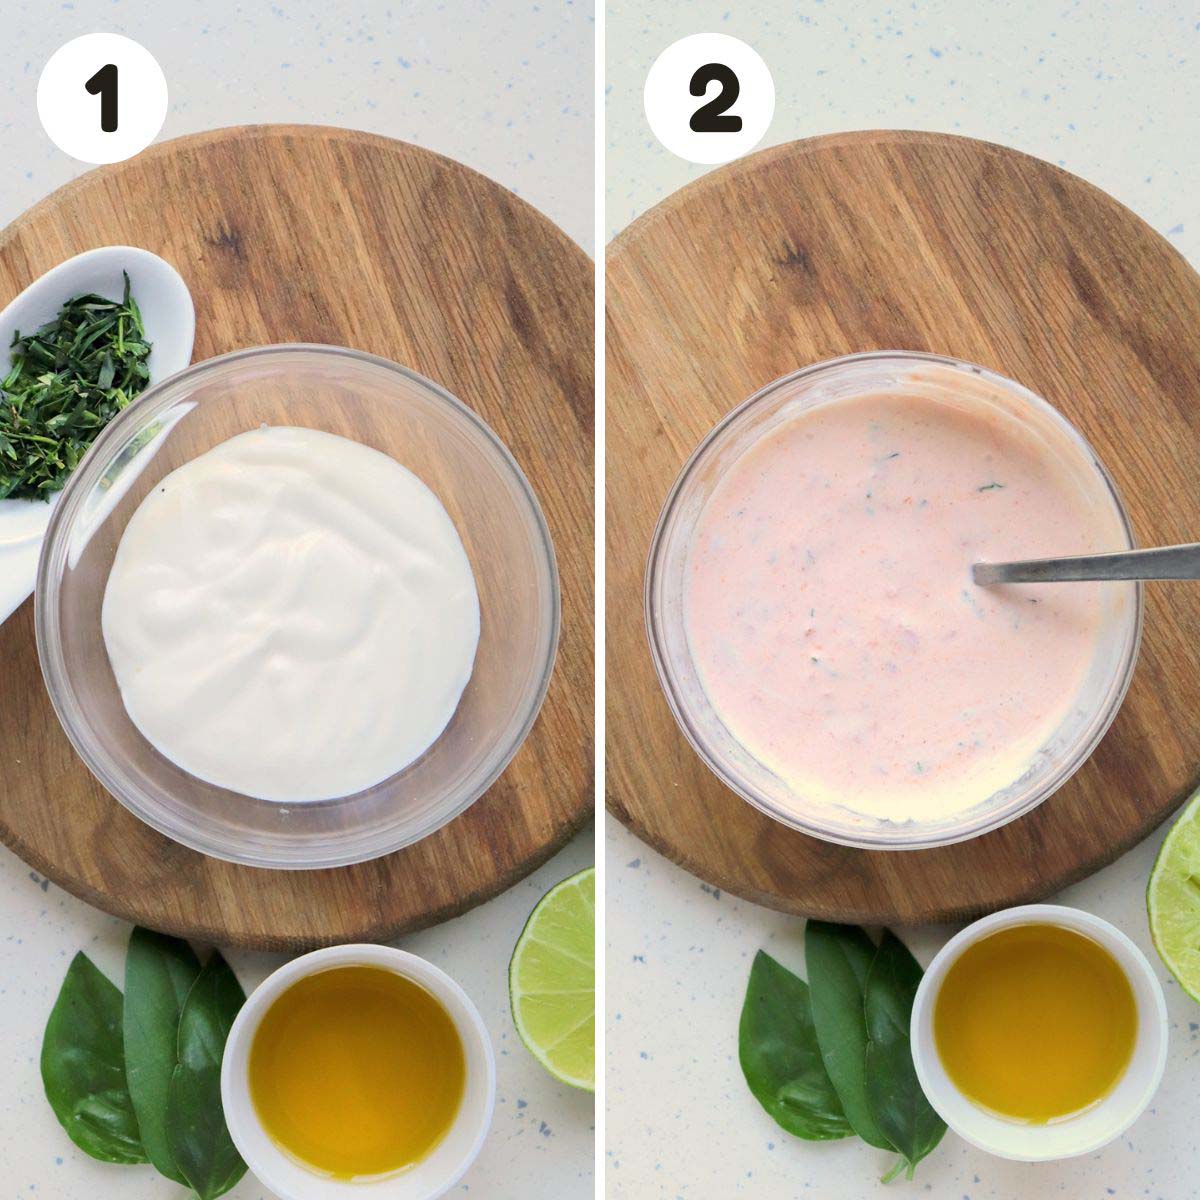 Steps to make the chipotle sauce.